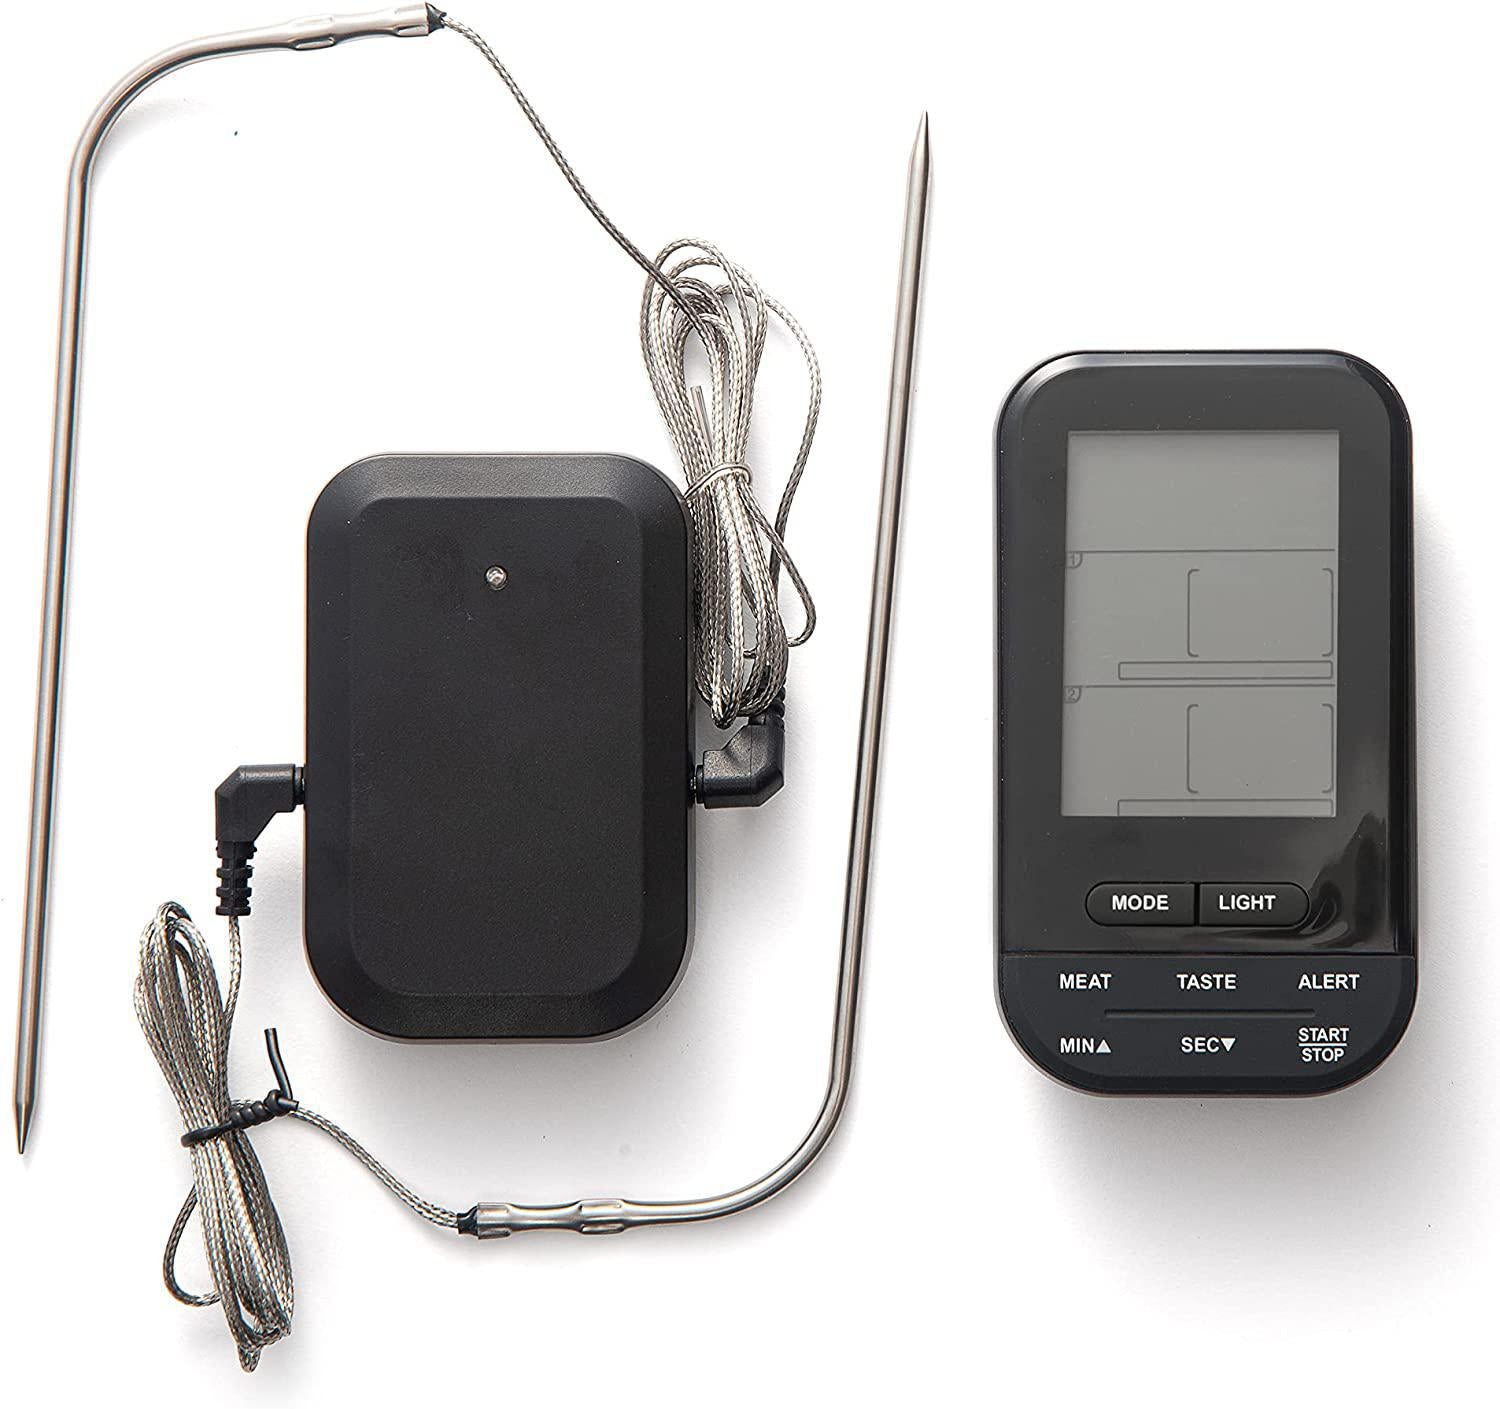 Outset Digital Wireless Dual Probe BBQ Thermometer – The Seasoned Gourmet